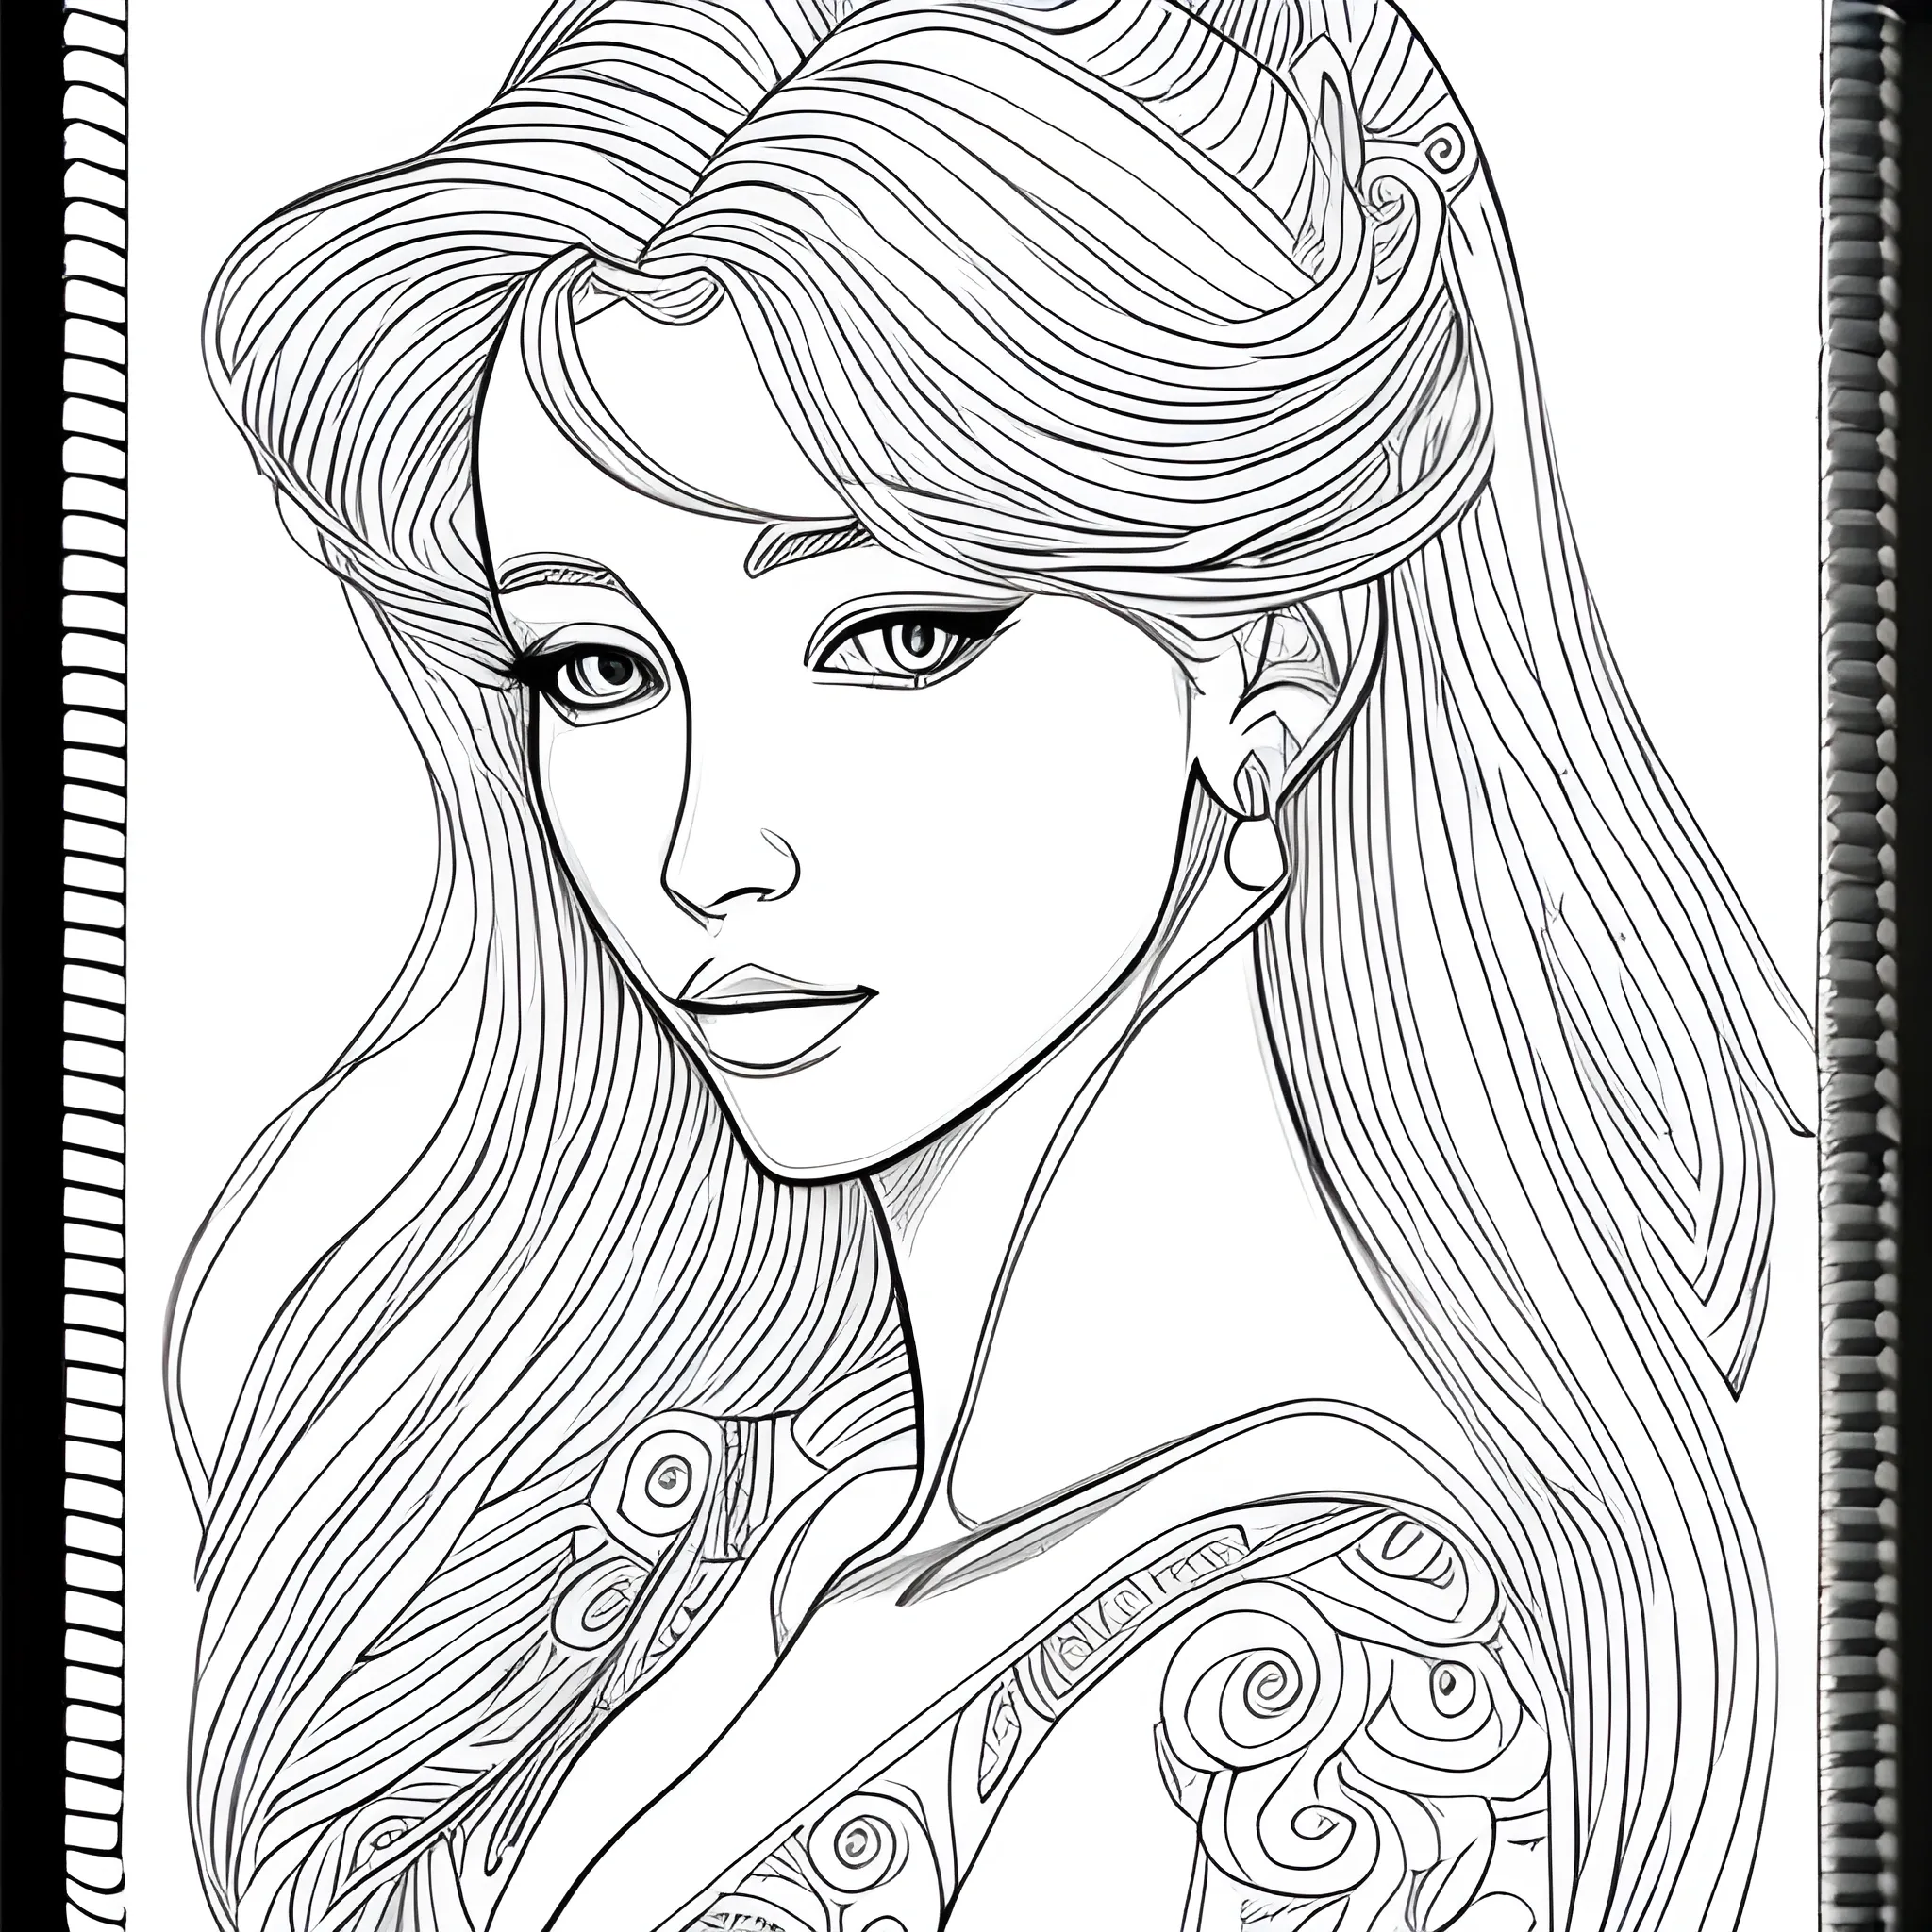 very beautiful woman coloring book page, Pencil Sketch